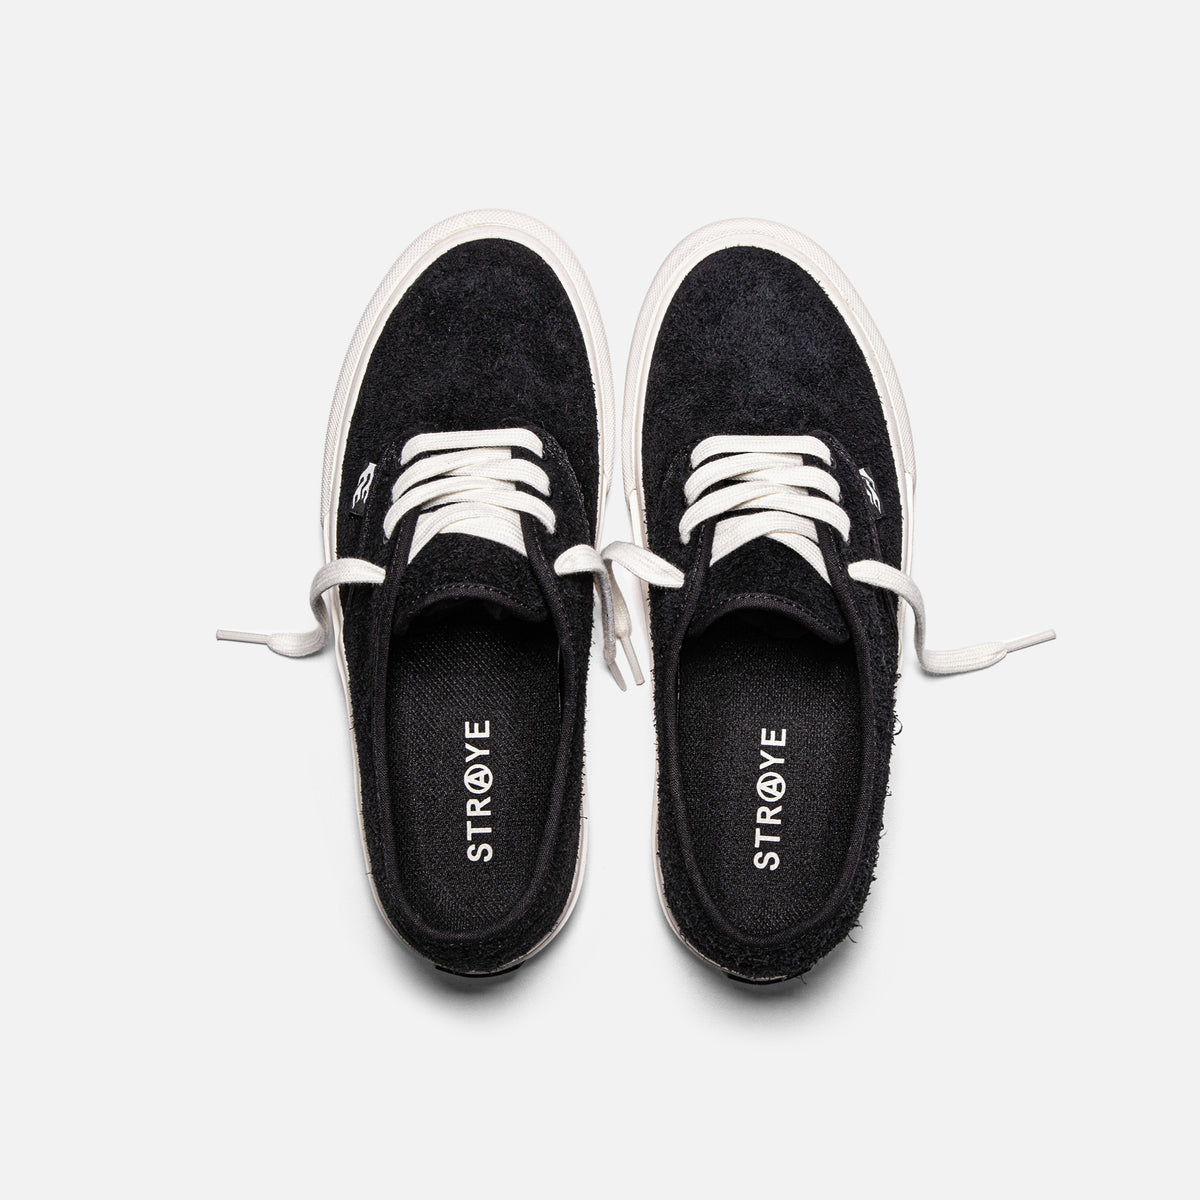 GOWER - BLACK SUEDE | TOP VIEW